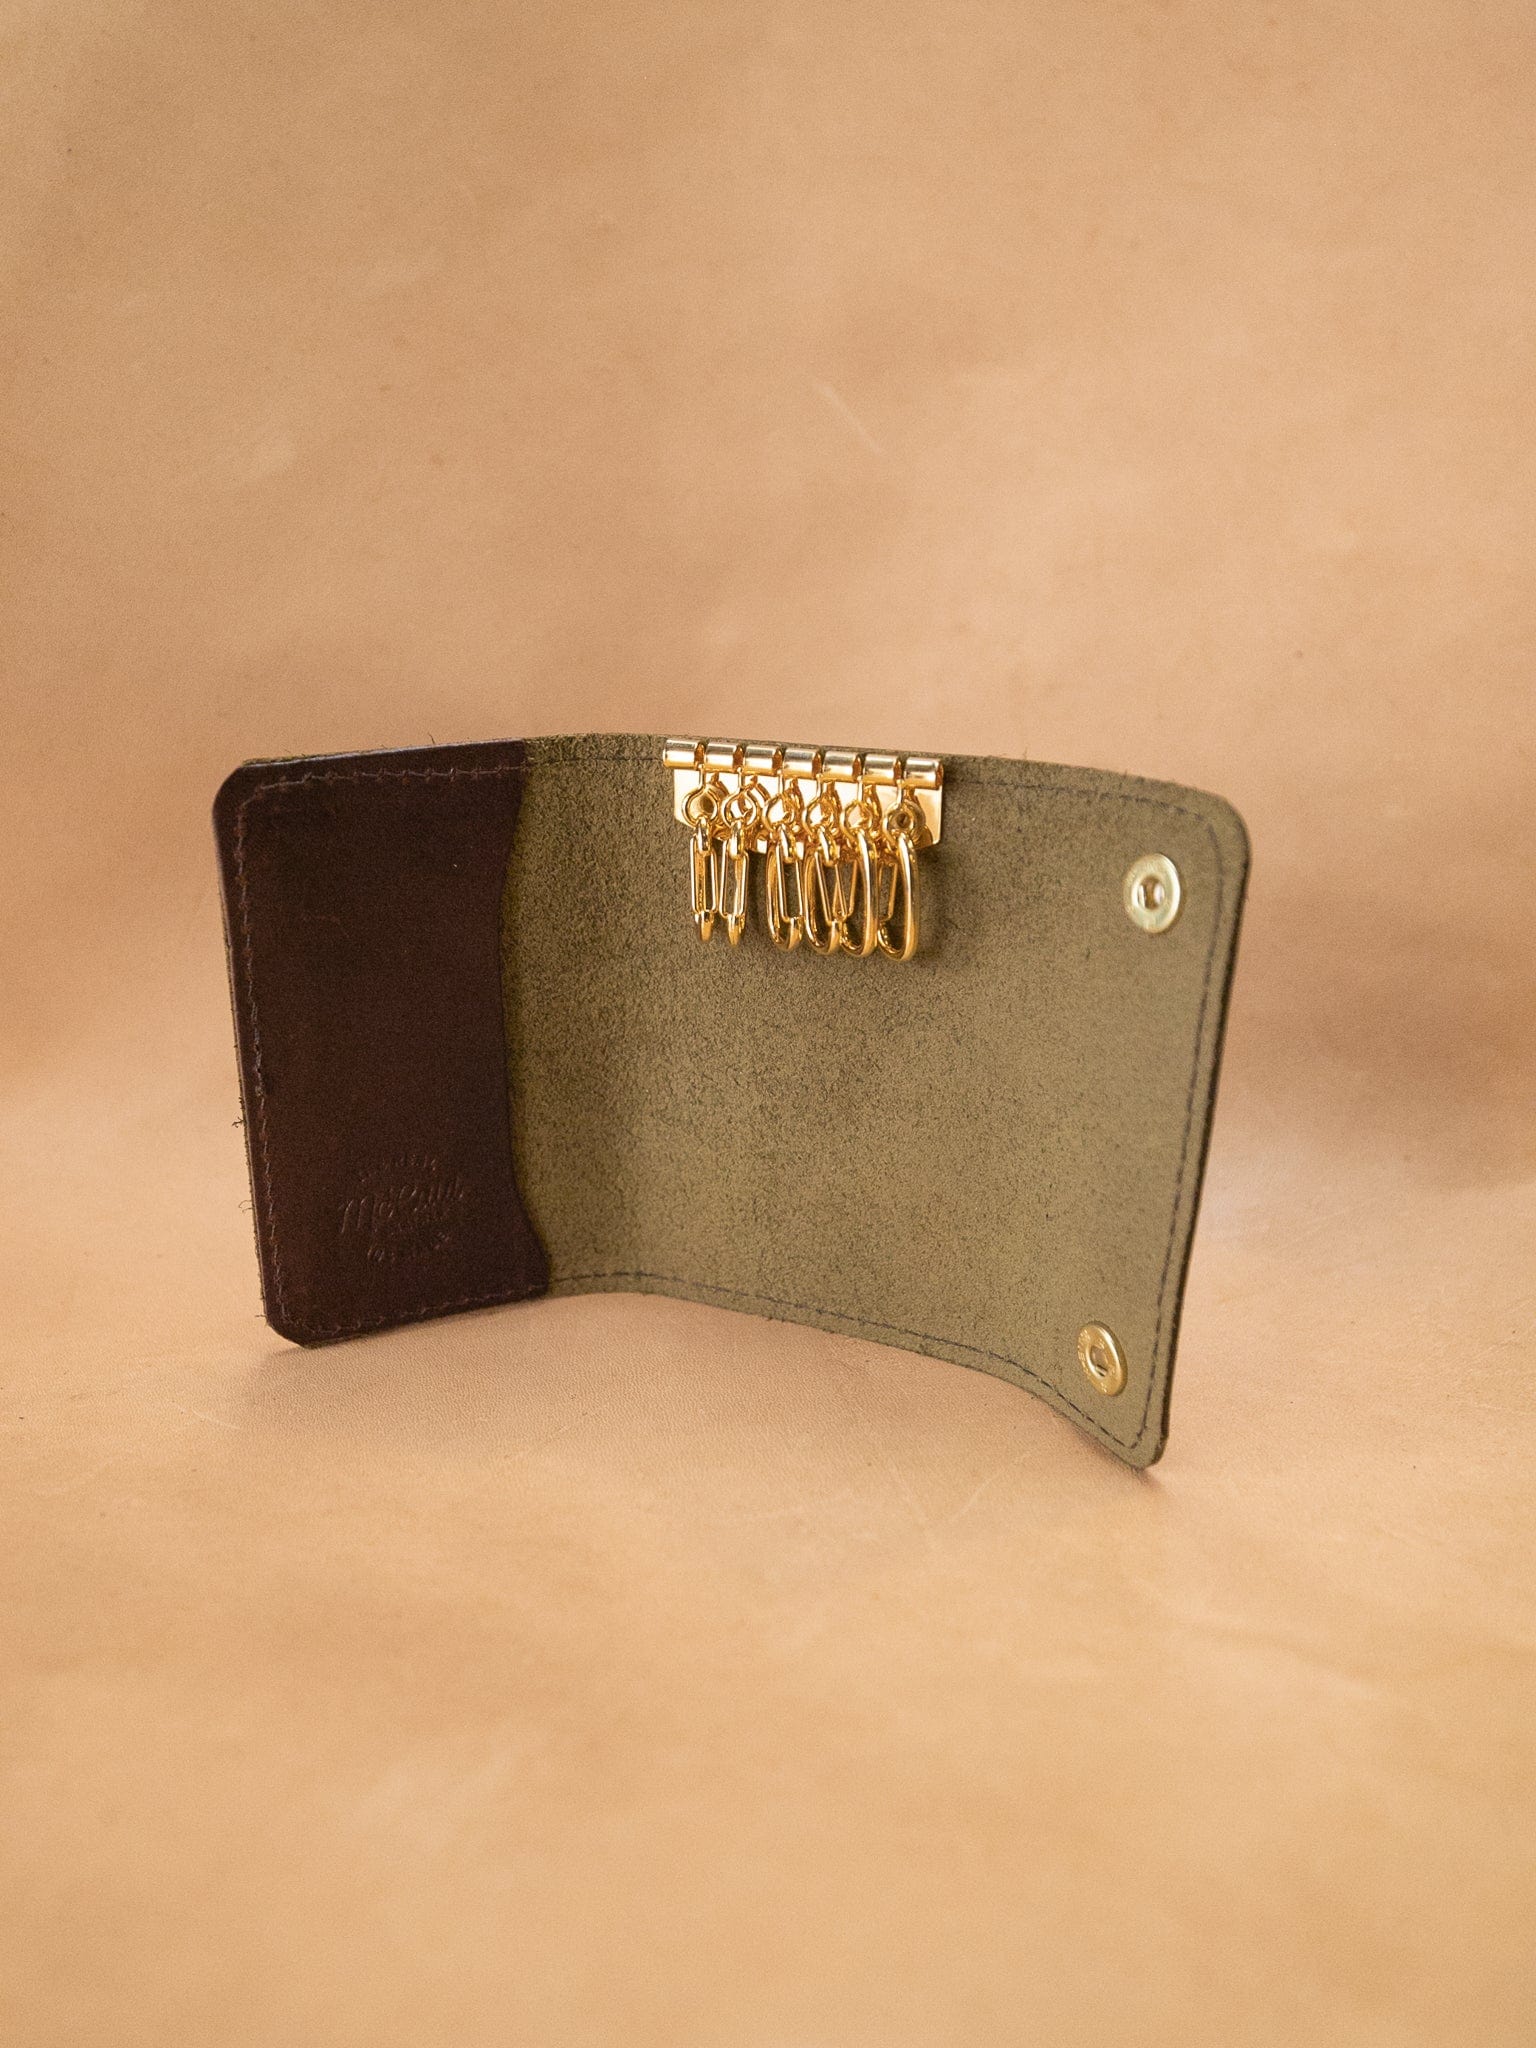 The Real McCaul Coin Purse Key Case Wallet Australian Made Australian Owned Tri-Pocket Leather Pouch 